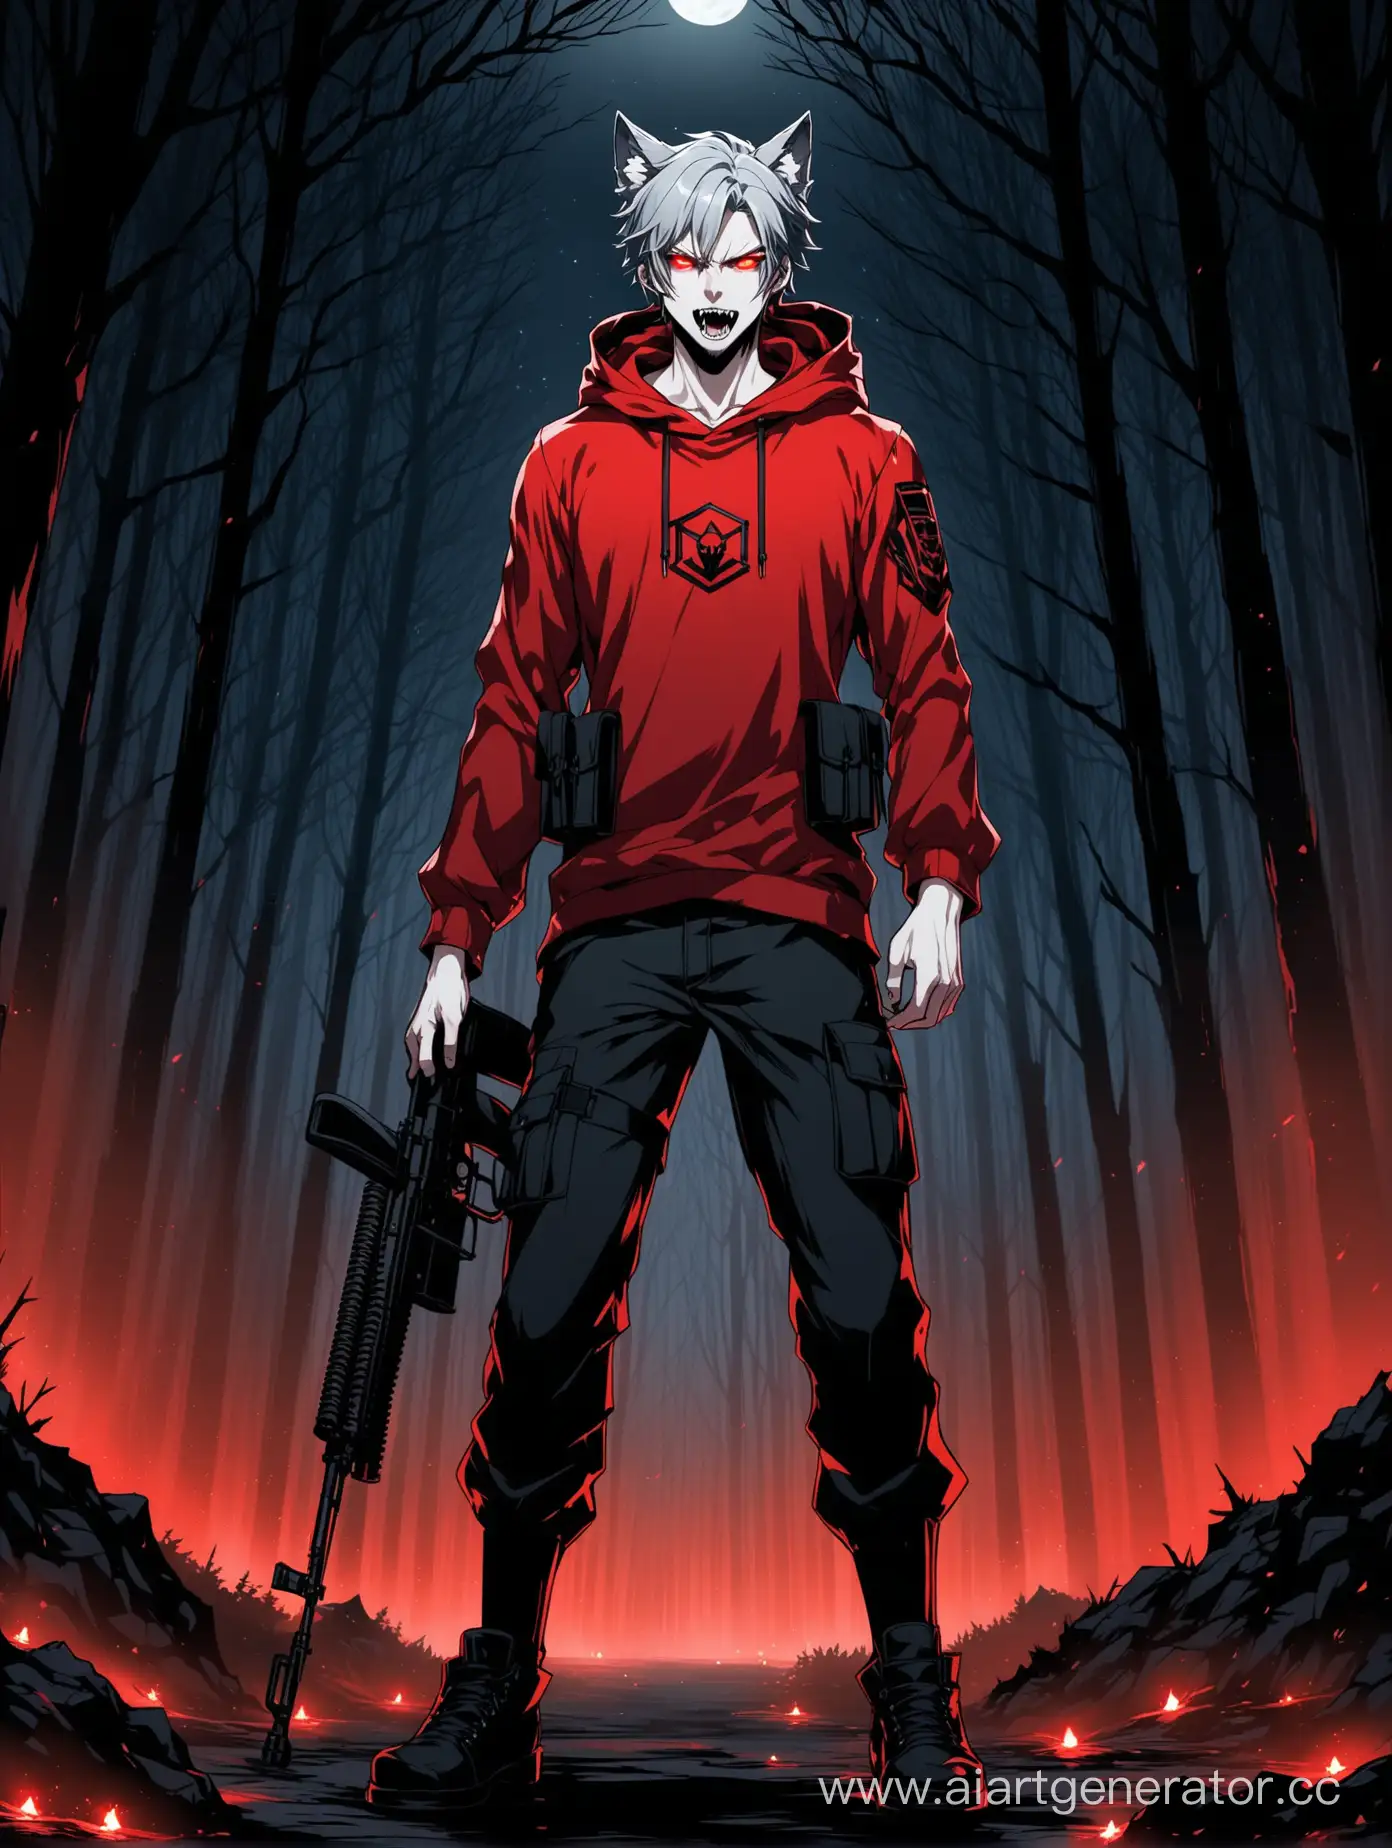  grey hair, wolf ears, short hair, male, glowing eyes, slim face, angular and fierce facial features, big fangs, pale skin, mid 20s, black military pants, red hoodie with hexagonal black metal pieces, black coat, rifle colored in black and red, night, forest, full height